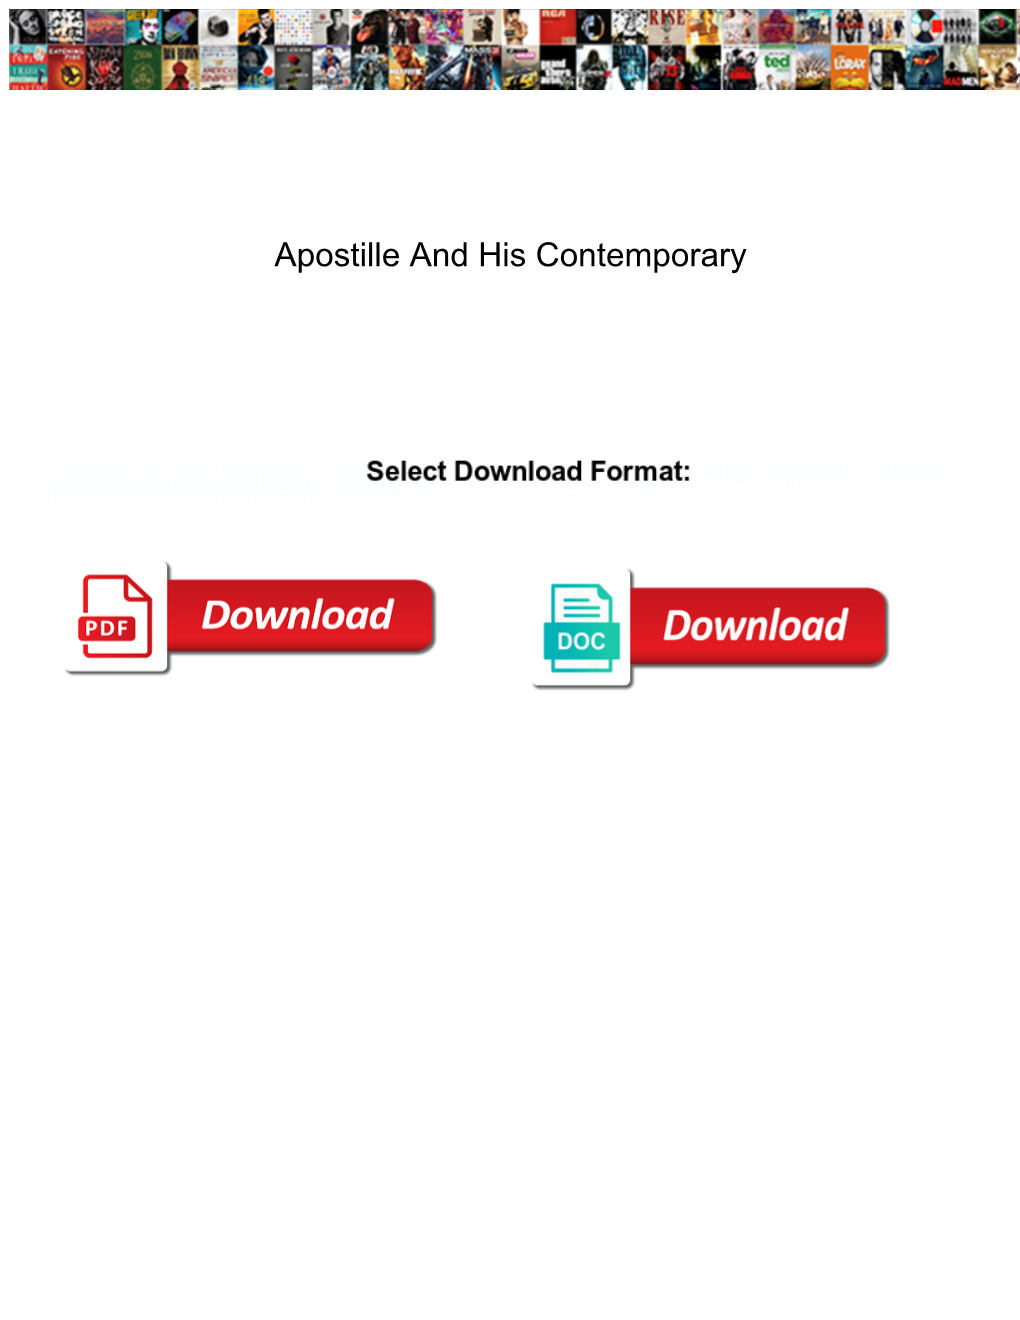 Apostille and His Contemporary